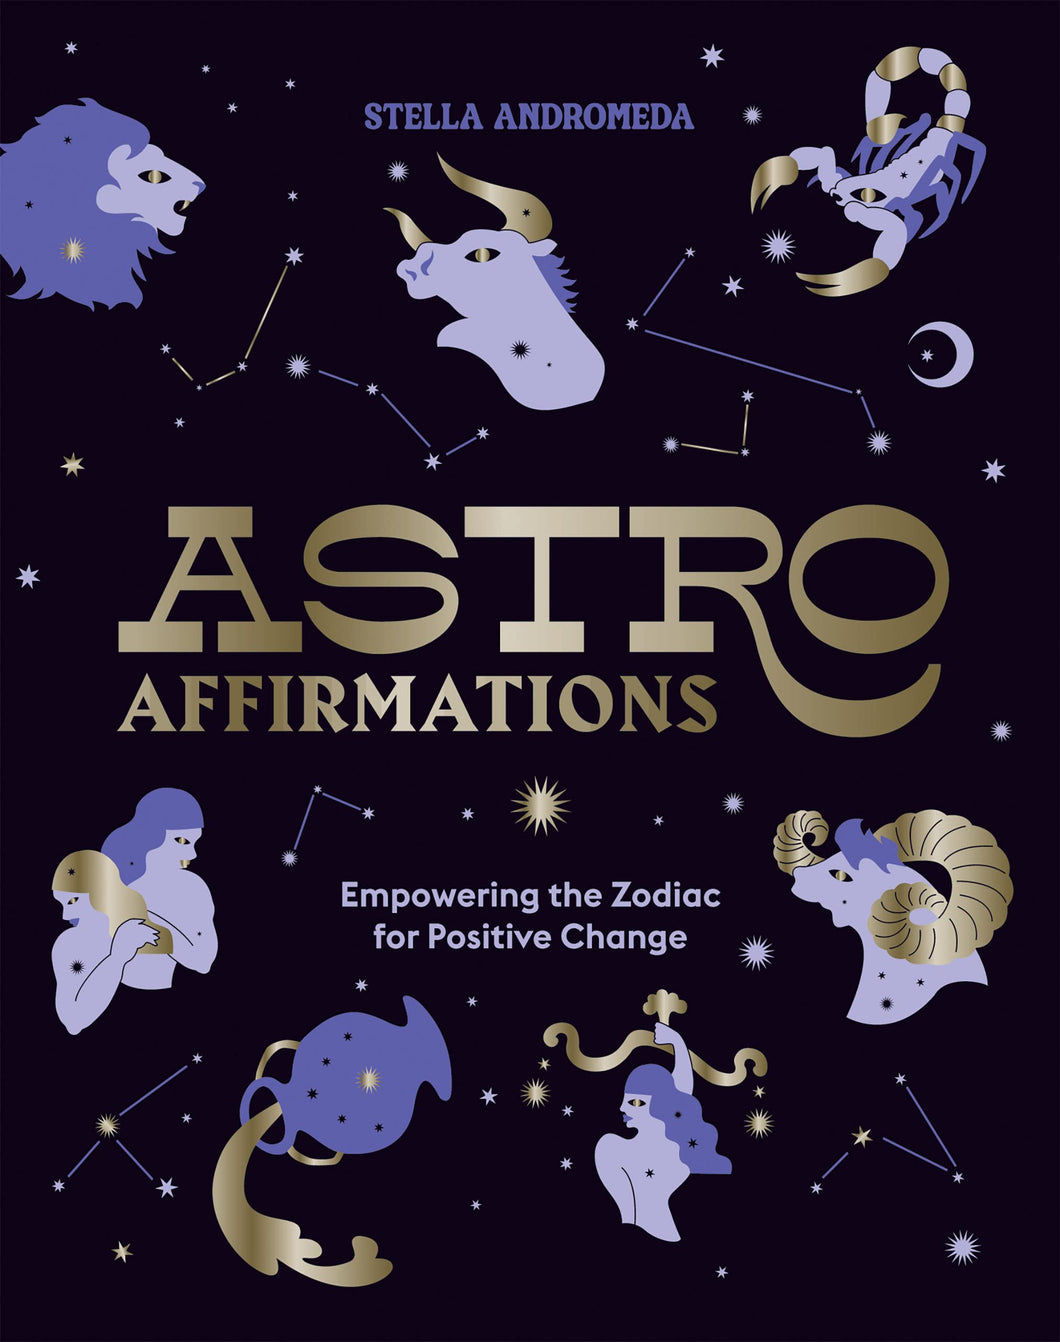 Astro affirmations by Stella Andromeda